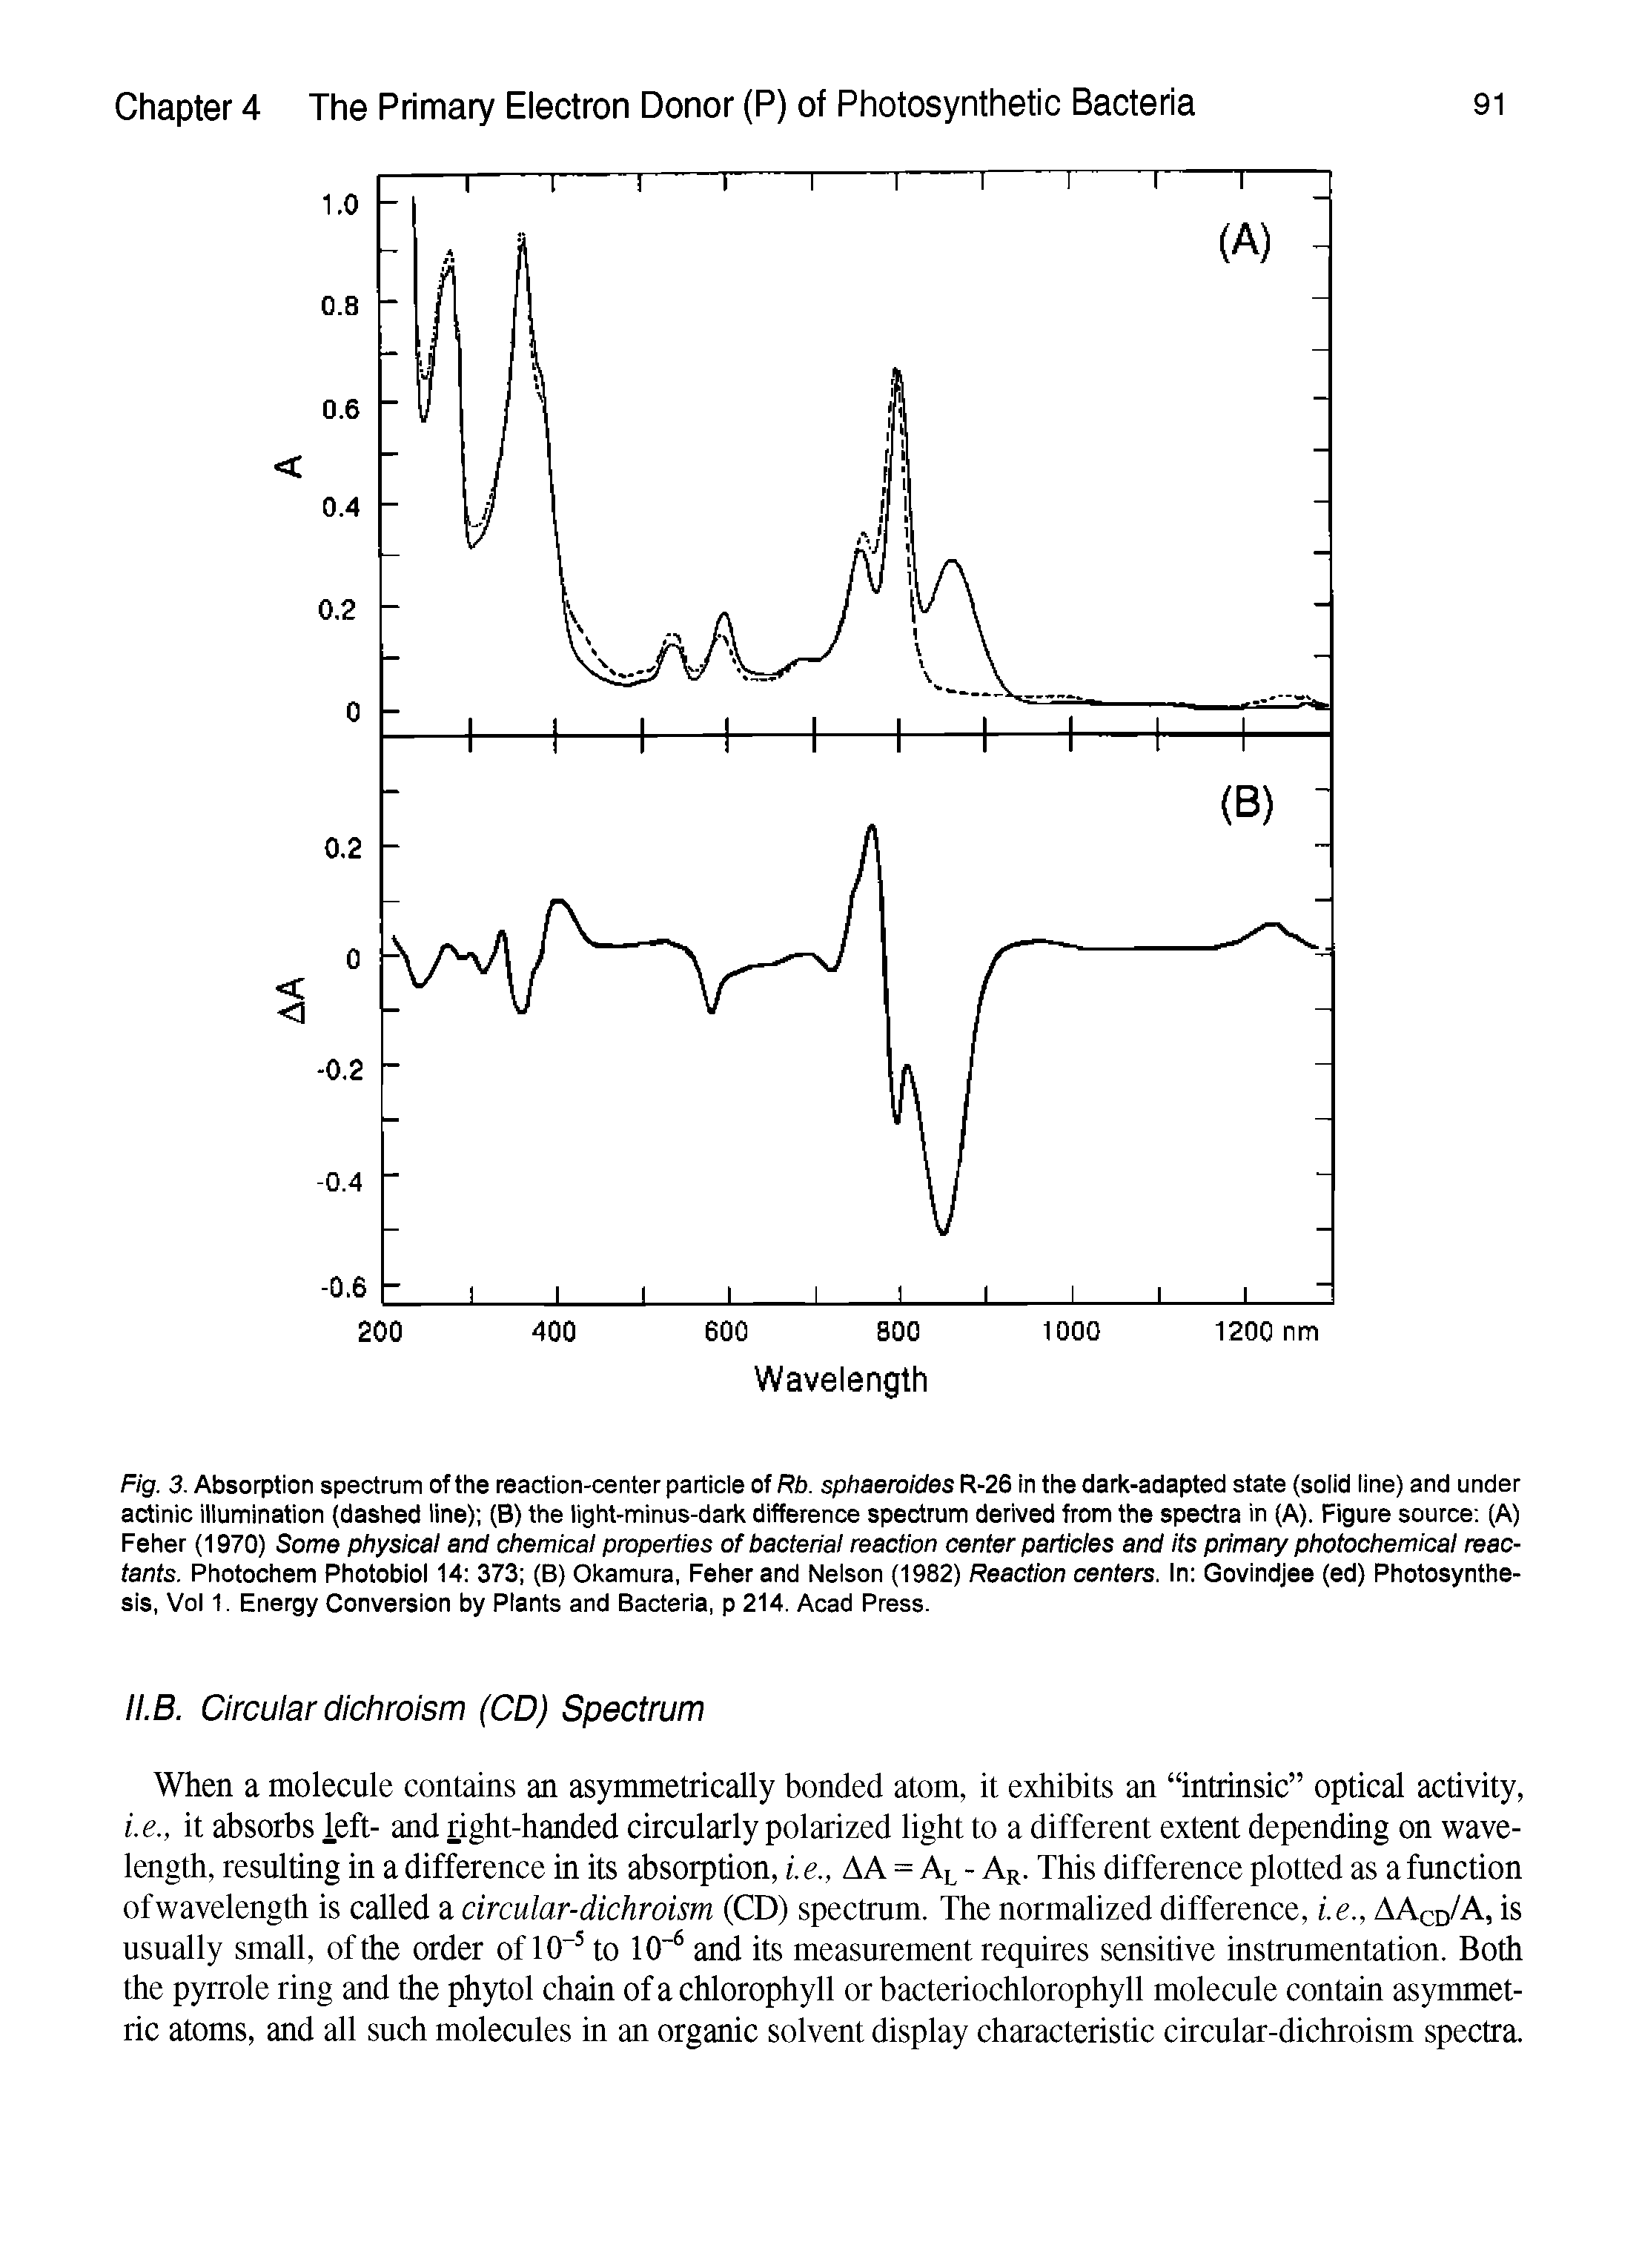 Fig. 3. Absorption spectrum of the reaction-center particie of Rb. sphaeroides R-26 in the dark-adapted state (soiid line) and under actinic illumination (dashed line) (B) the light-minus-dark difference spectrum derived from the spectra in (A). Figure source (A) Feher (1970) Some physical and chemical properties of bacteria reaction center particles and its primary photochemical reactants. Photochem Photobiol 14 373 (B) Okamura, Feher and Nelson (1982) Reaction centers. In Govindjee (ed) Photosynthesis, Vol 1. Energy Conversion by Plants and Bacteria, p 214. Acad Press.